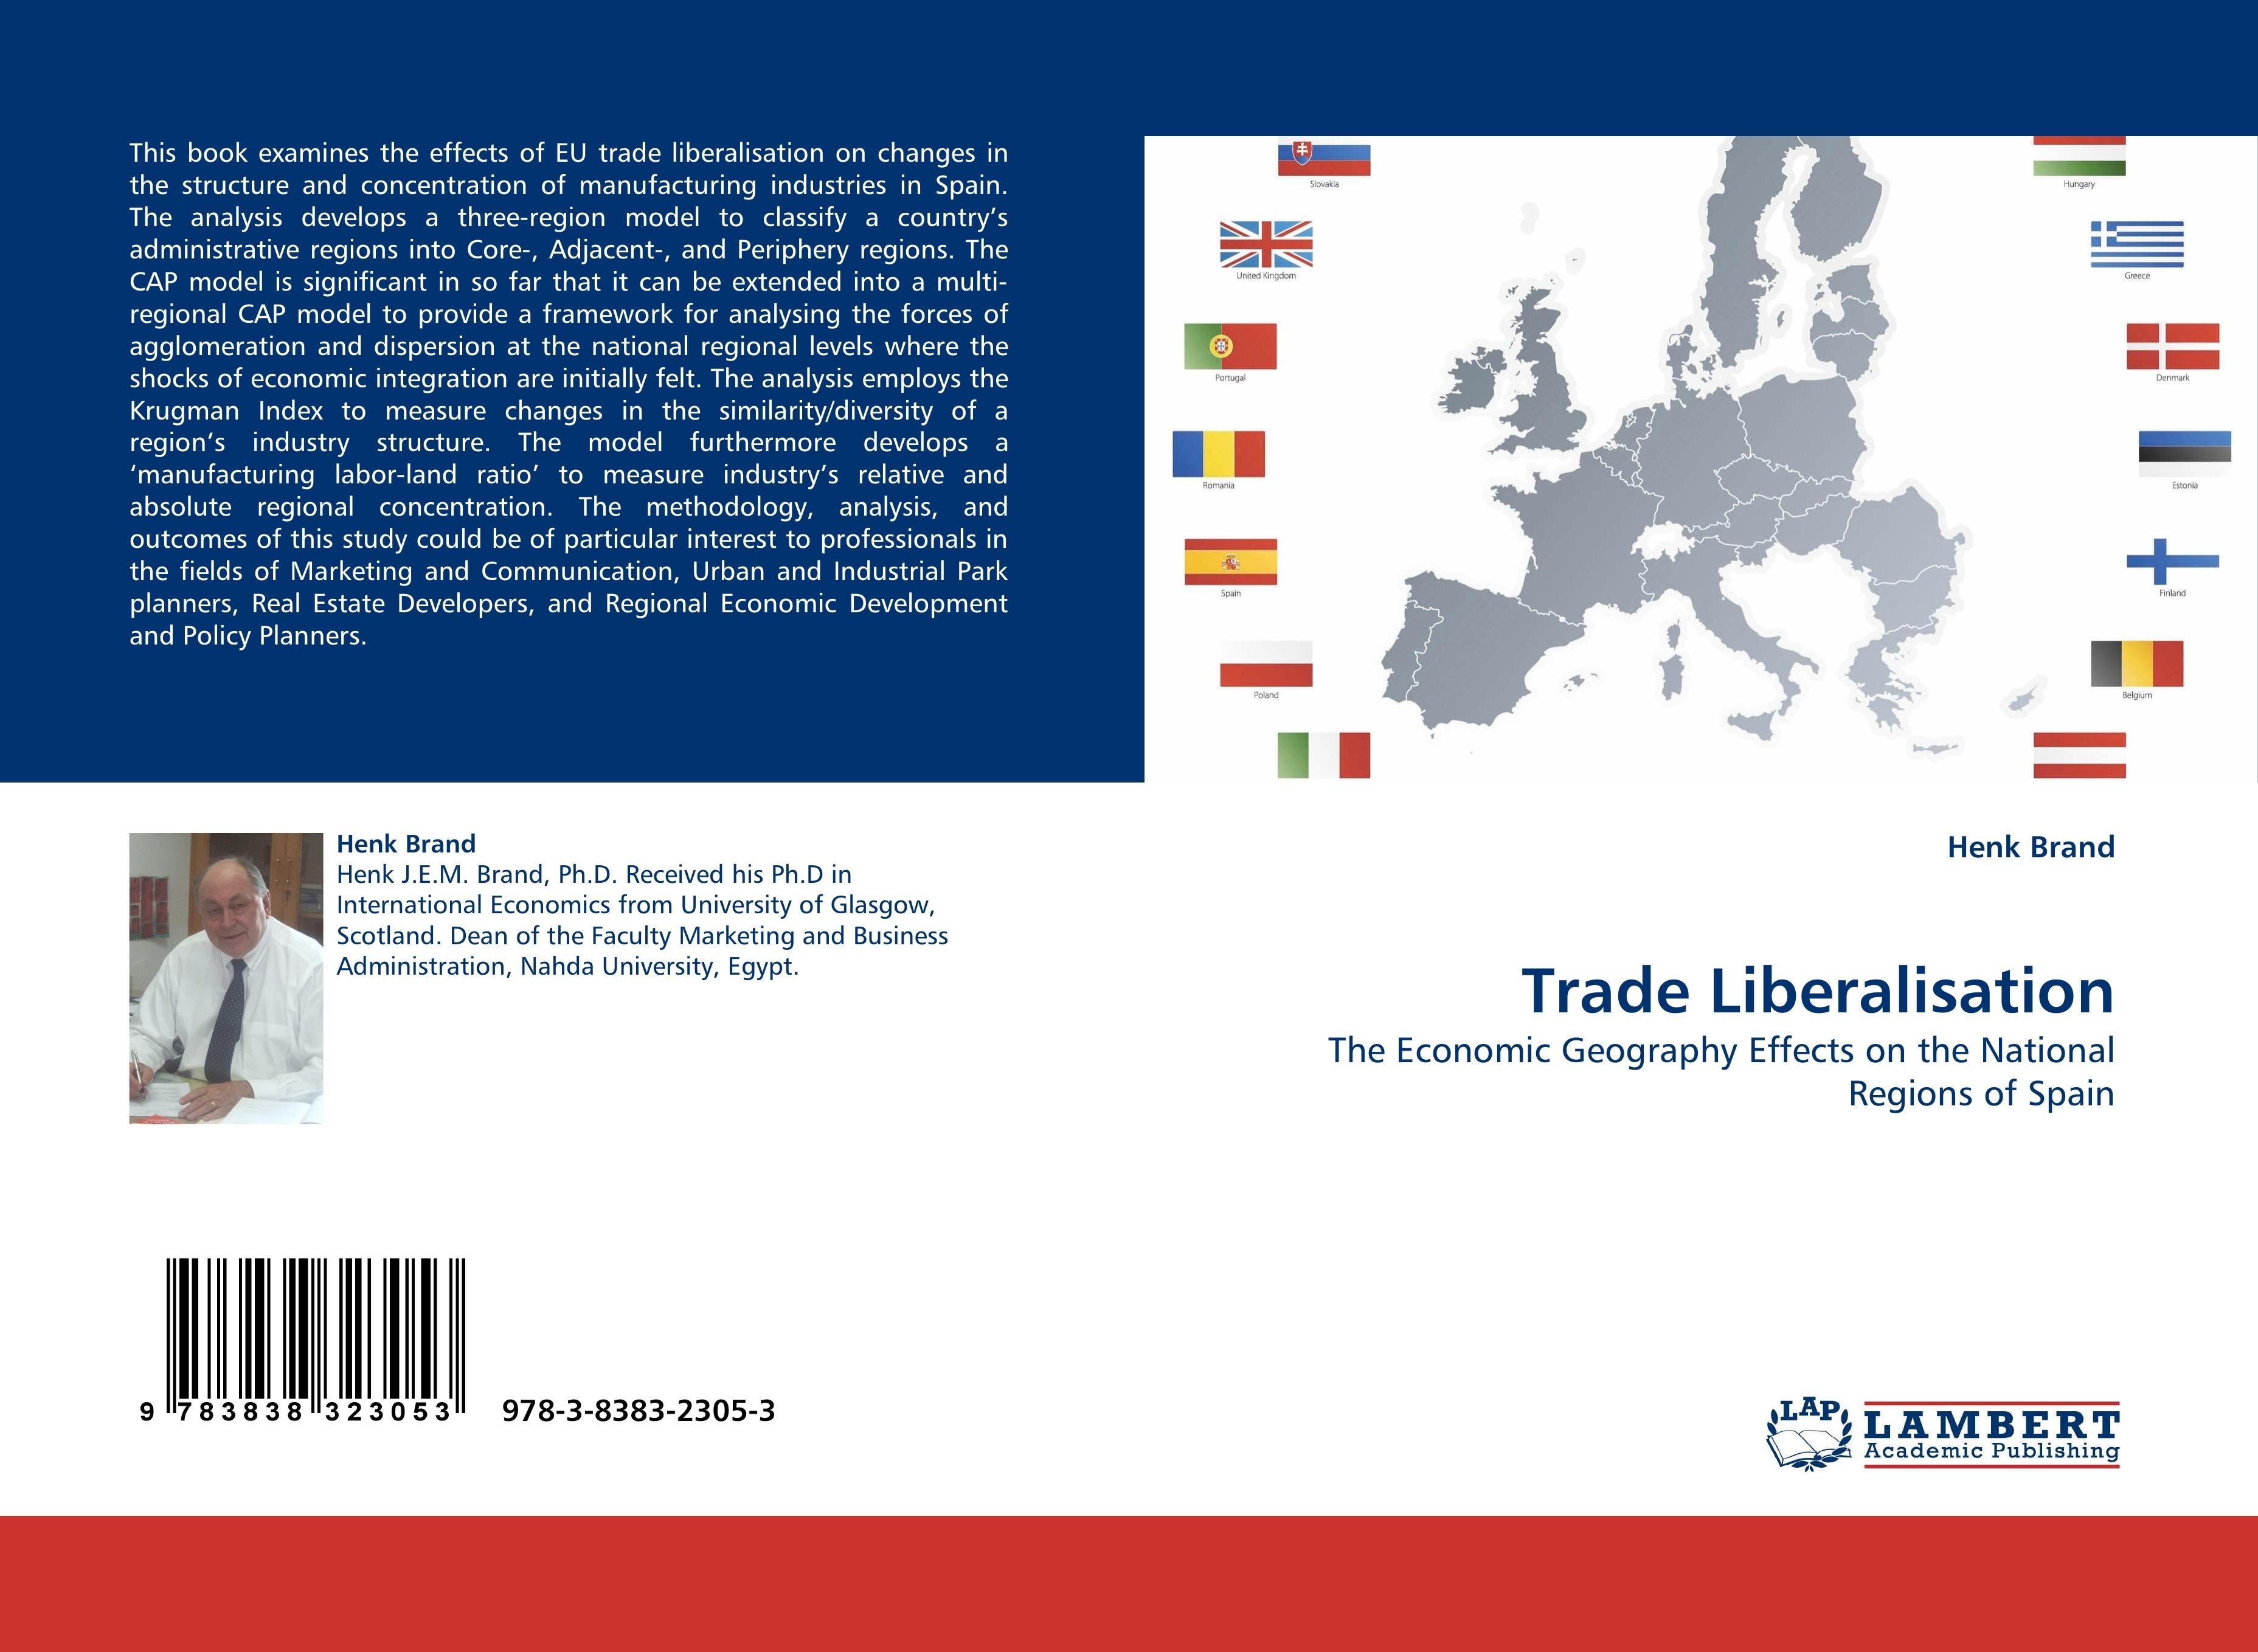 Trade Liberalisation / The Economic Geography Effects on the National Regions of Spain / Henk Brand / Taschenbuch / Paperback / 72 S. / Englisch / 2010 / LAP LAMBERT Academic Publishing - Brand, Henk